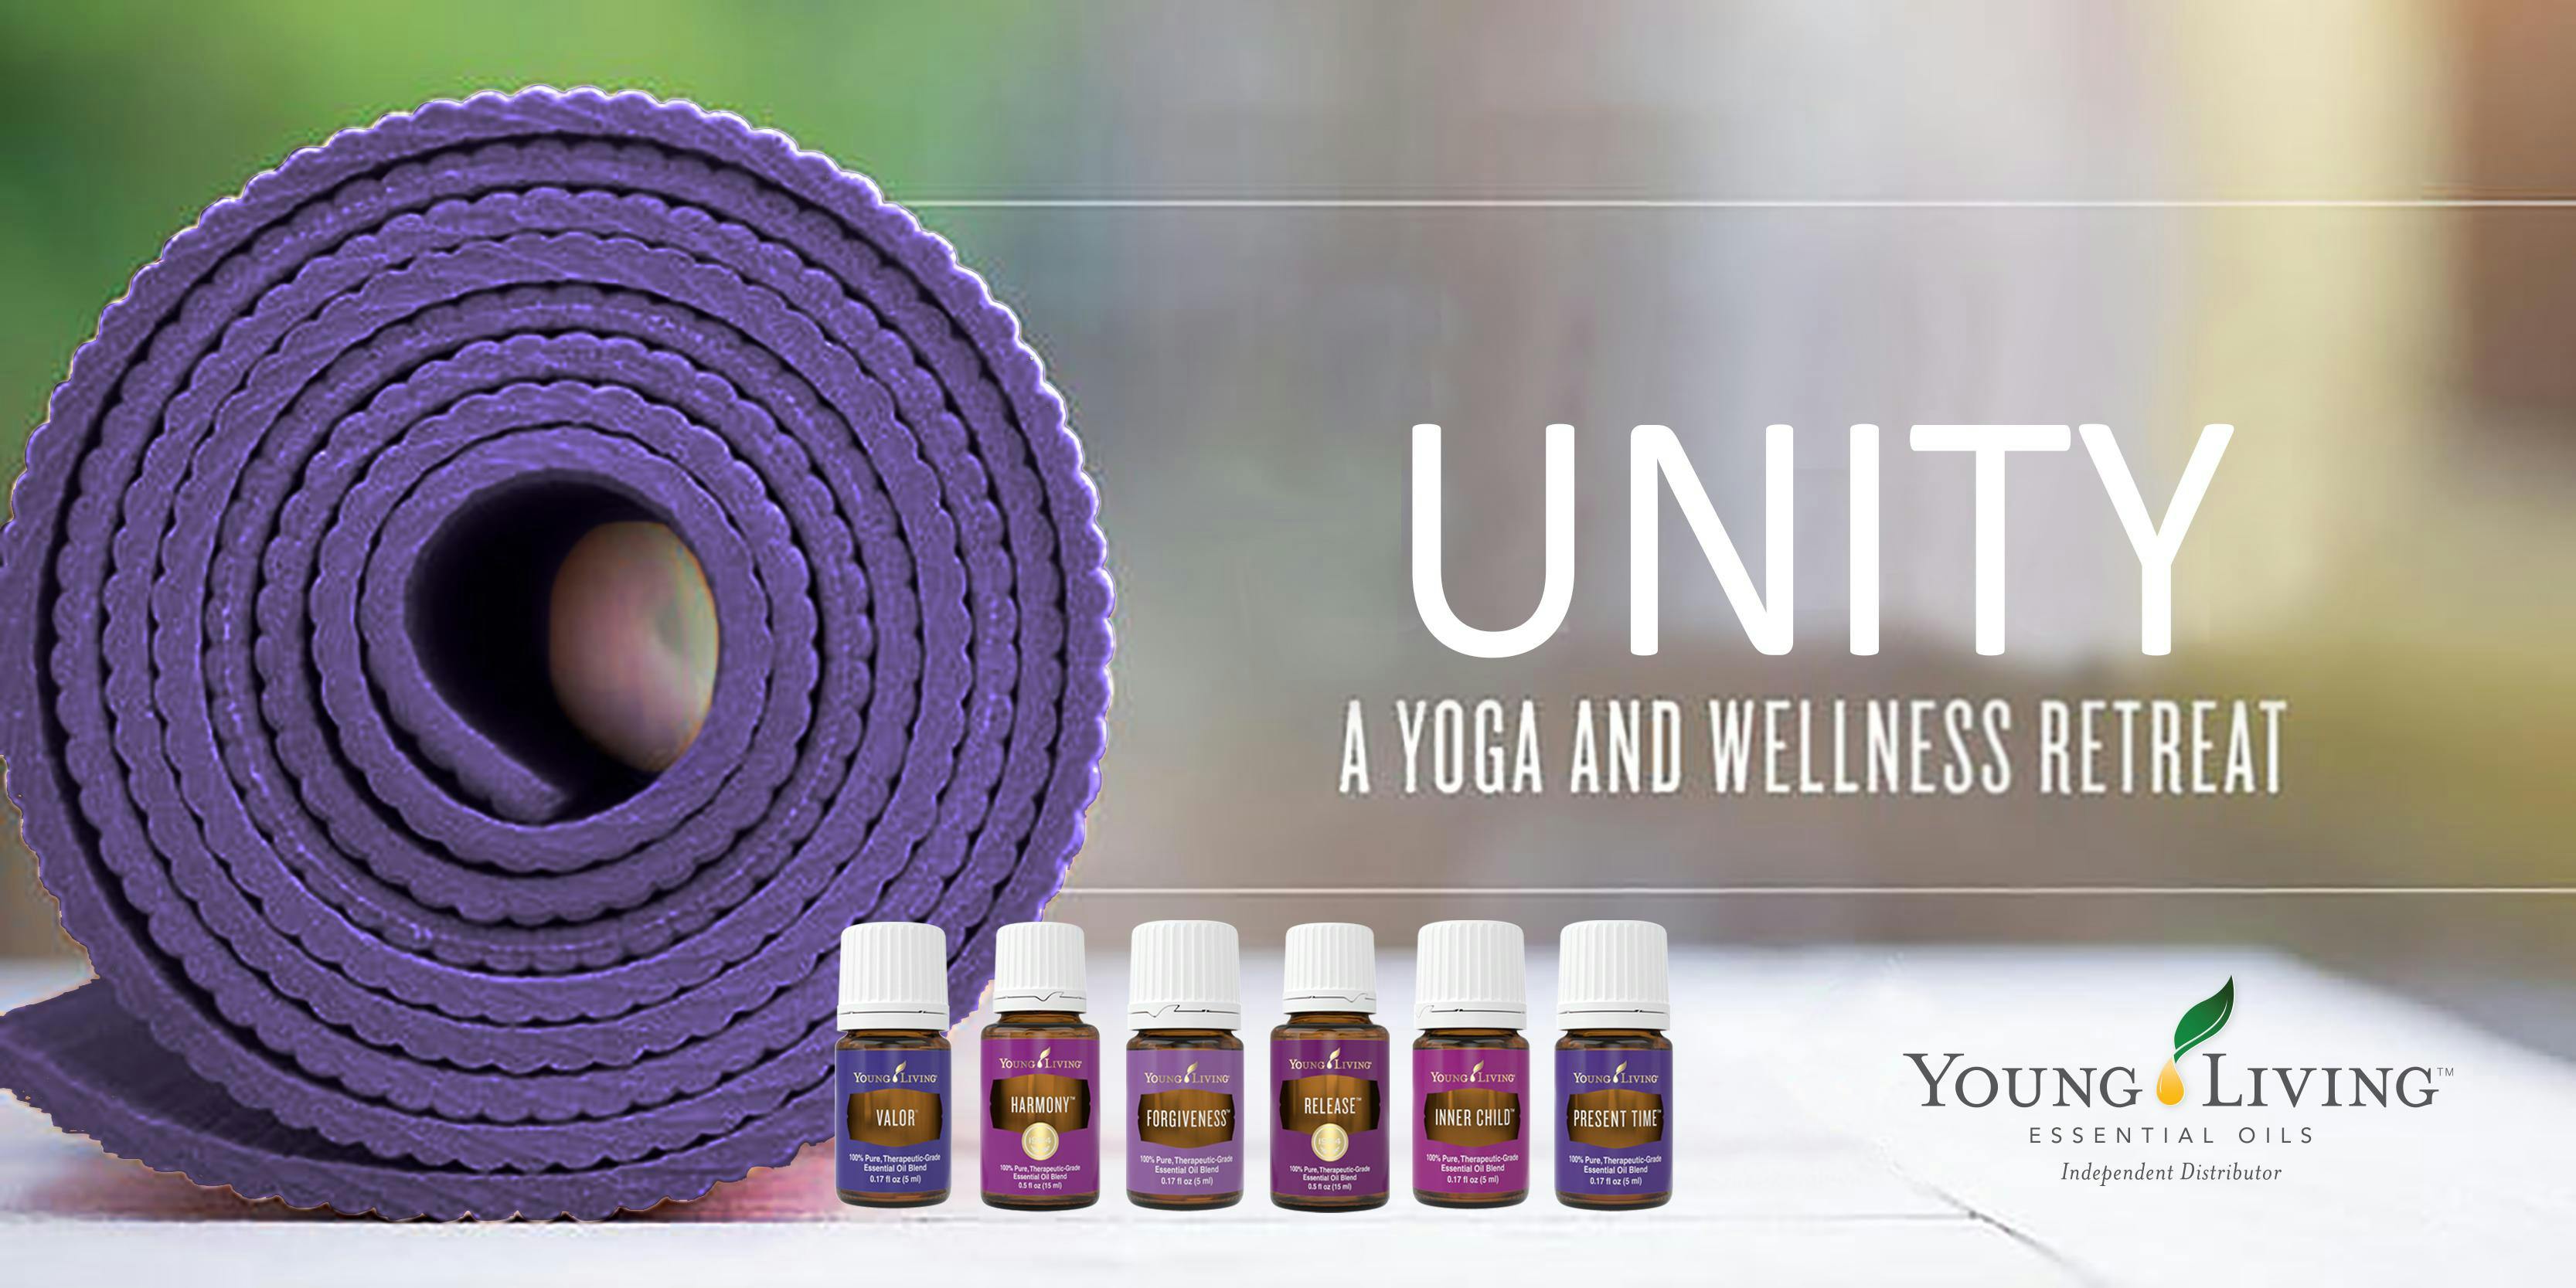 UNITY: Yoga and Wellness Retreat in Rochester, NY